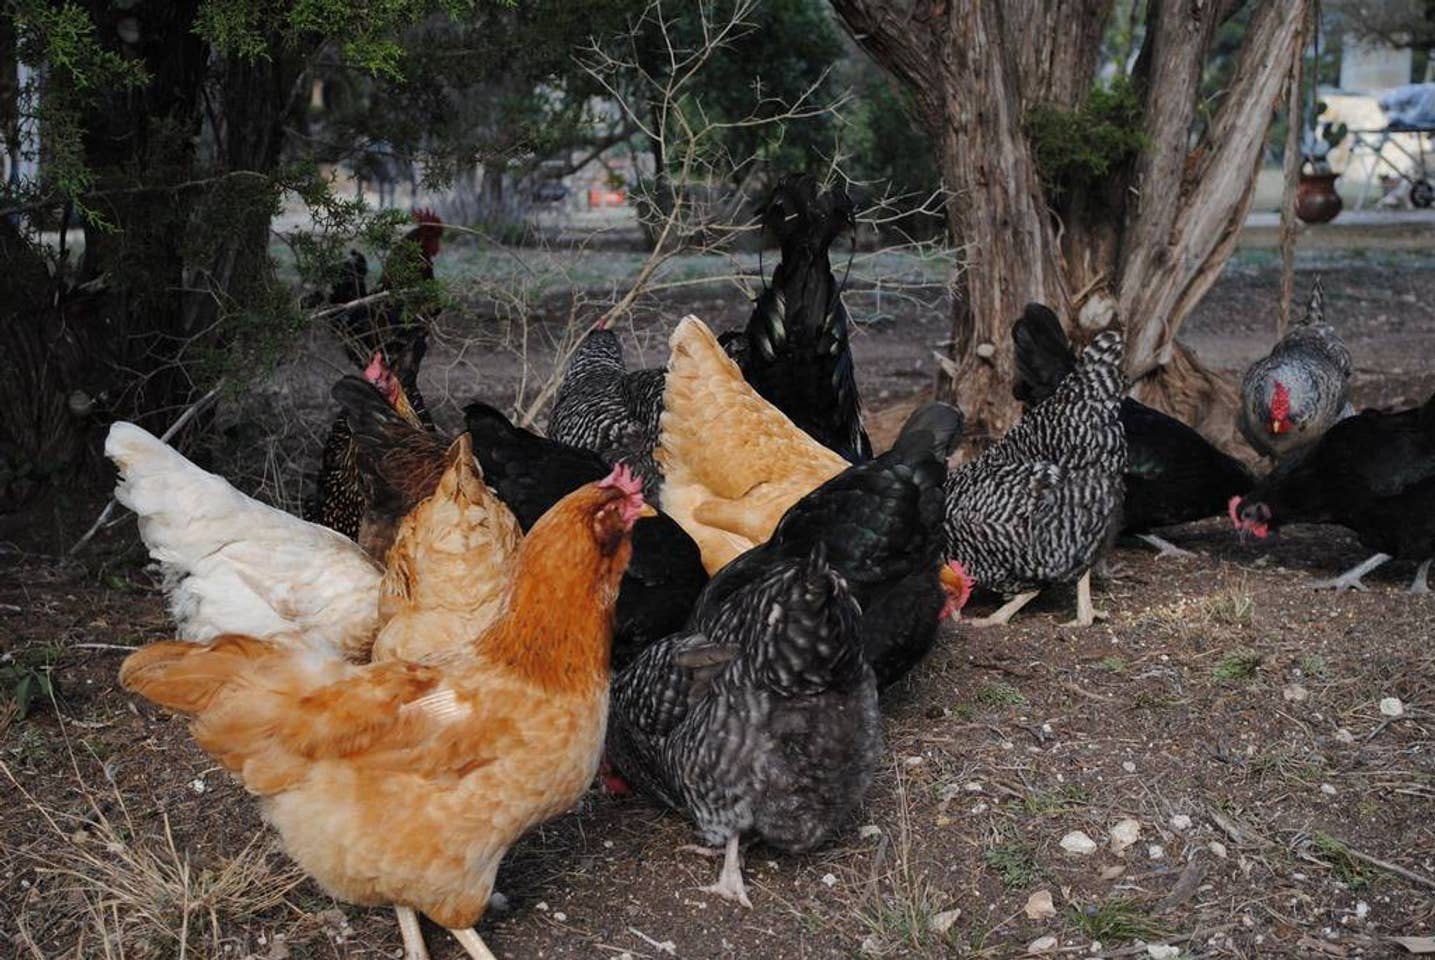                                                 Are your morning eggs farm fresh? These ladies will vouch that they are!